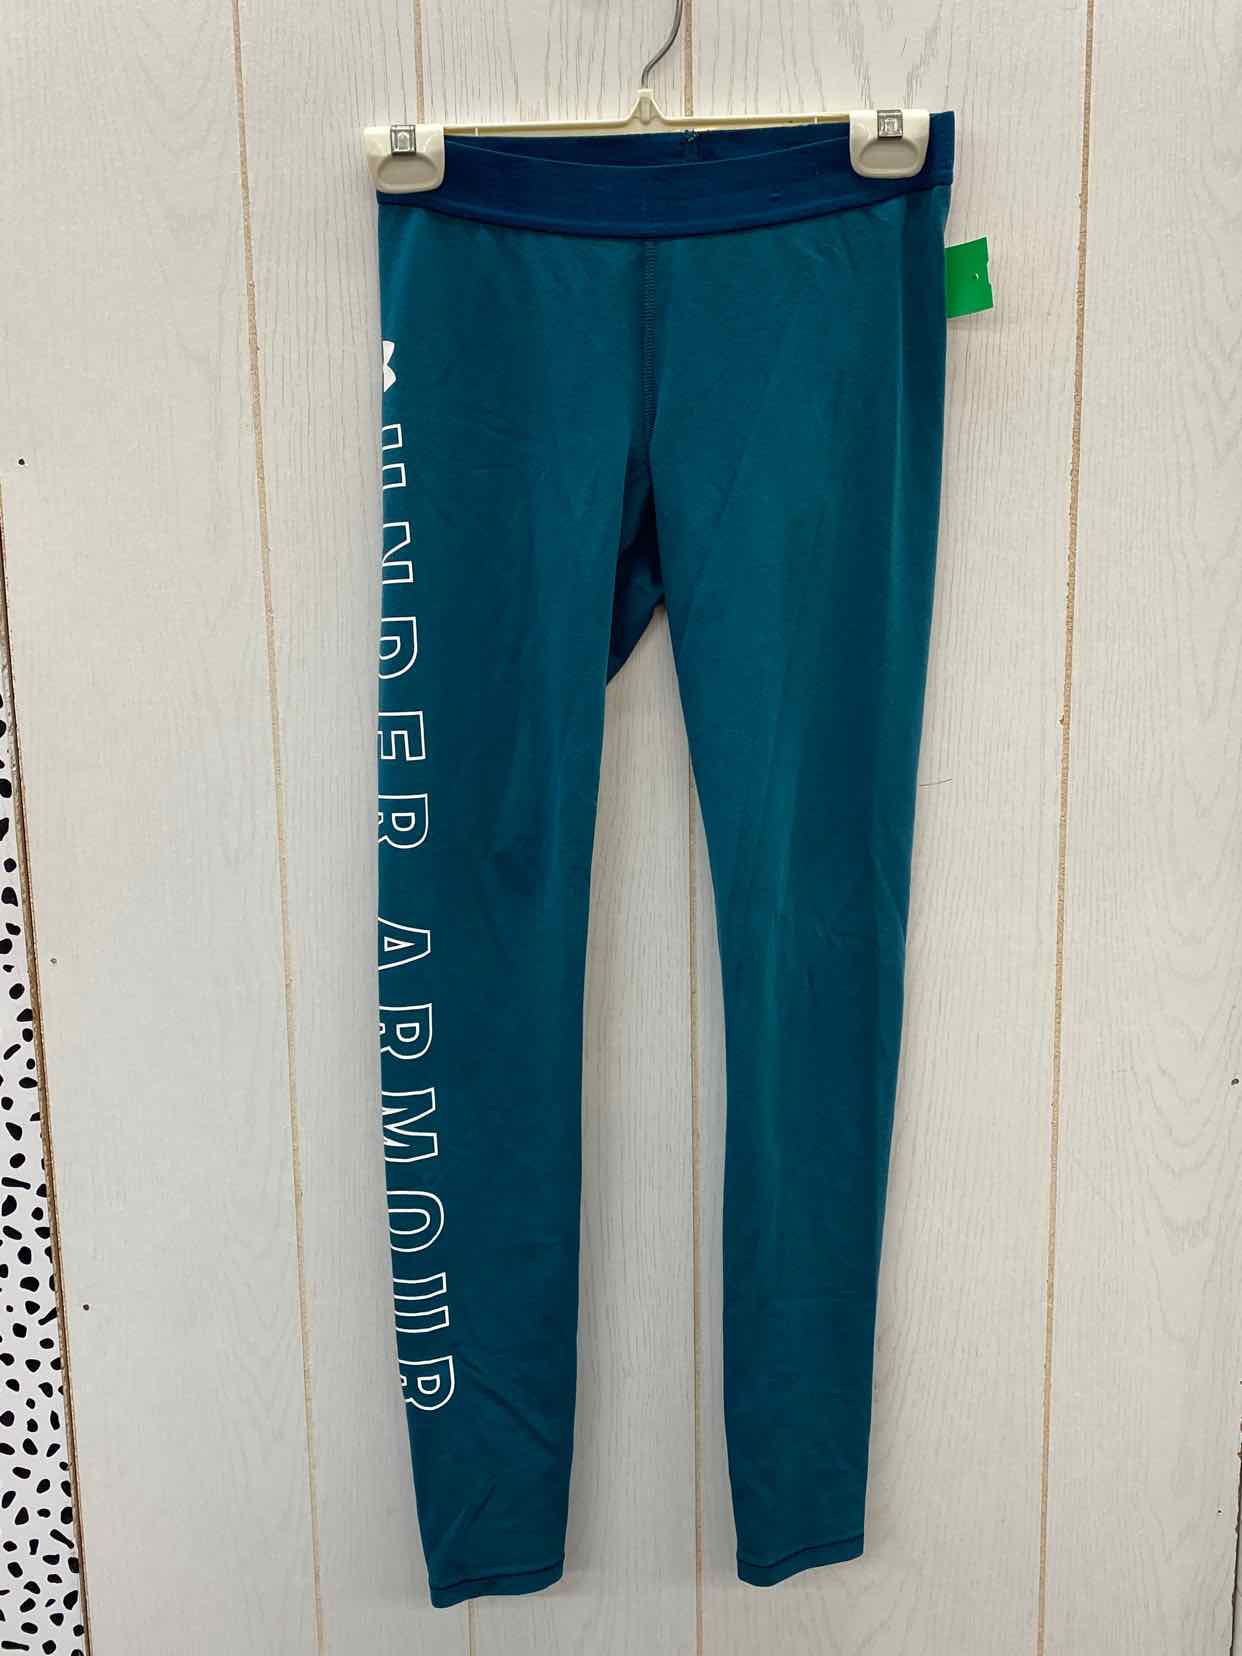 Under Armour Teal Womens Size XS Leggings – Twice As Nice Consignments